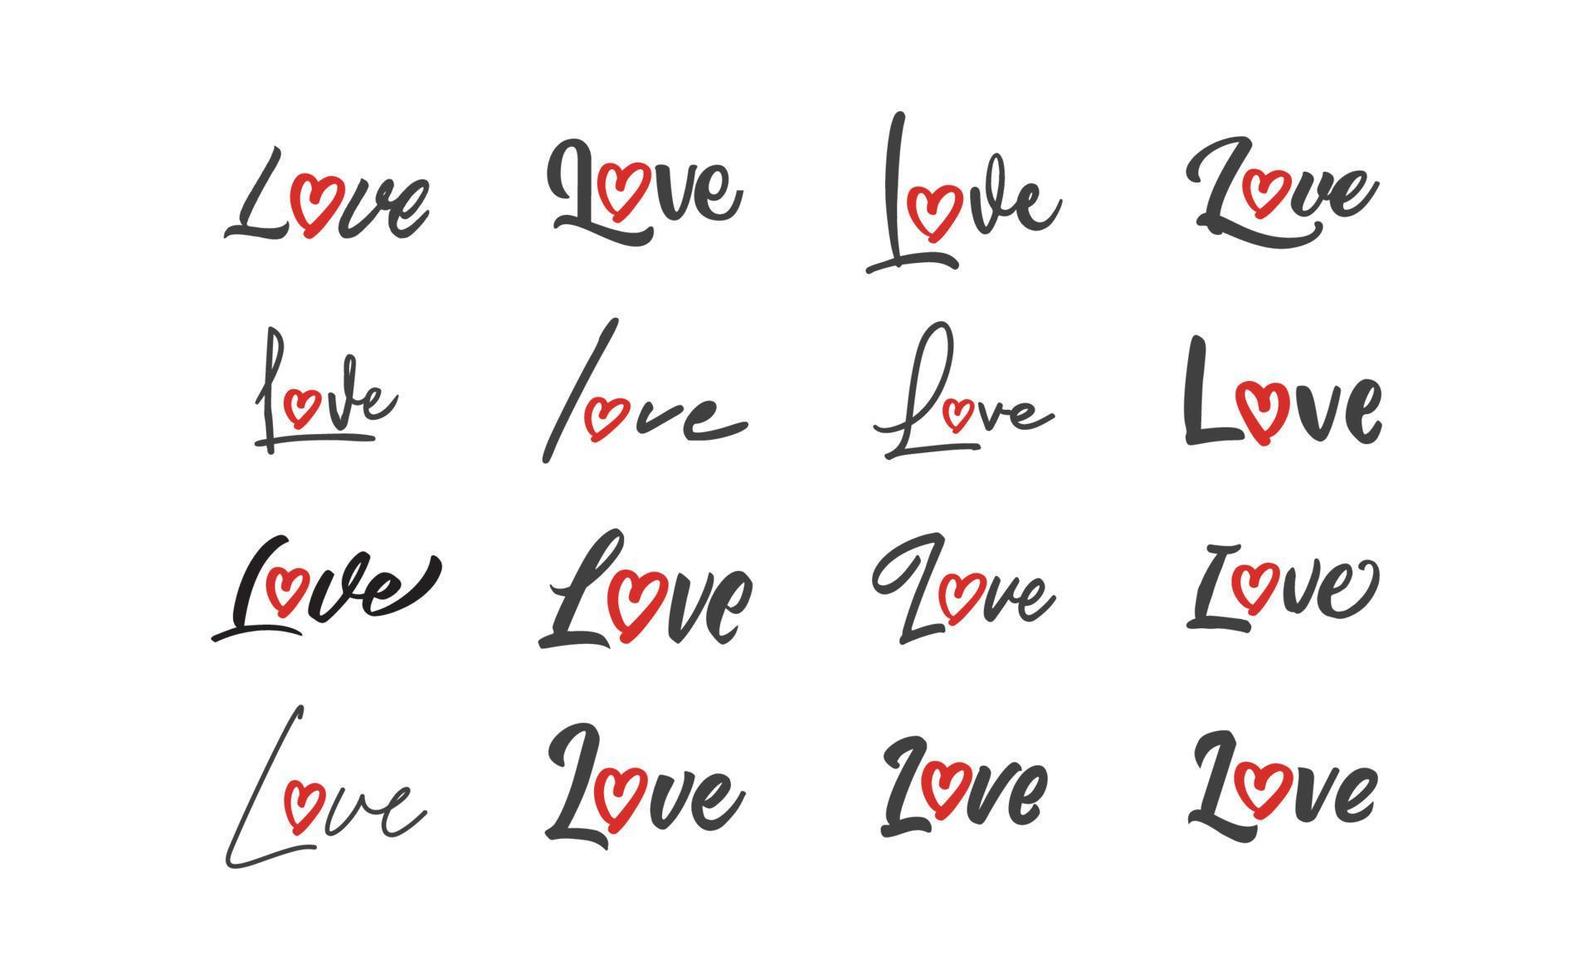 Love lettering with heart shape icon. Hand drawn style romantic card design. vector